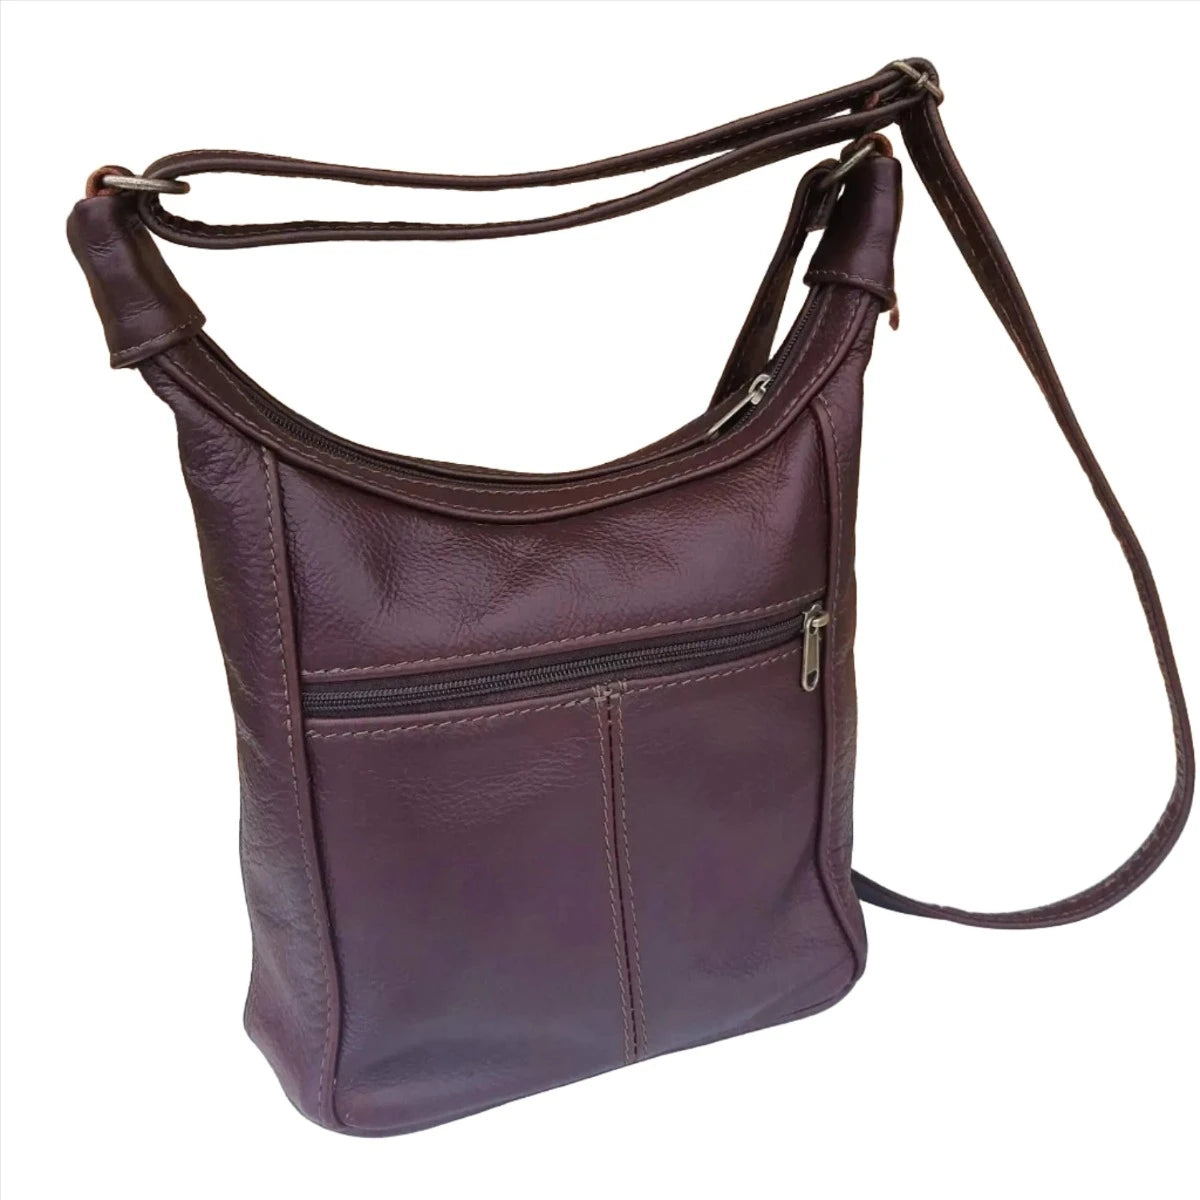 SH medium leather bags in dark tan colour from Cape Masai Leather